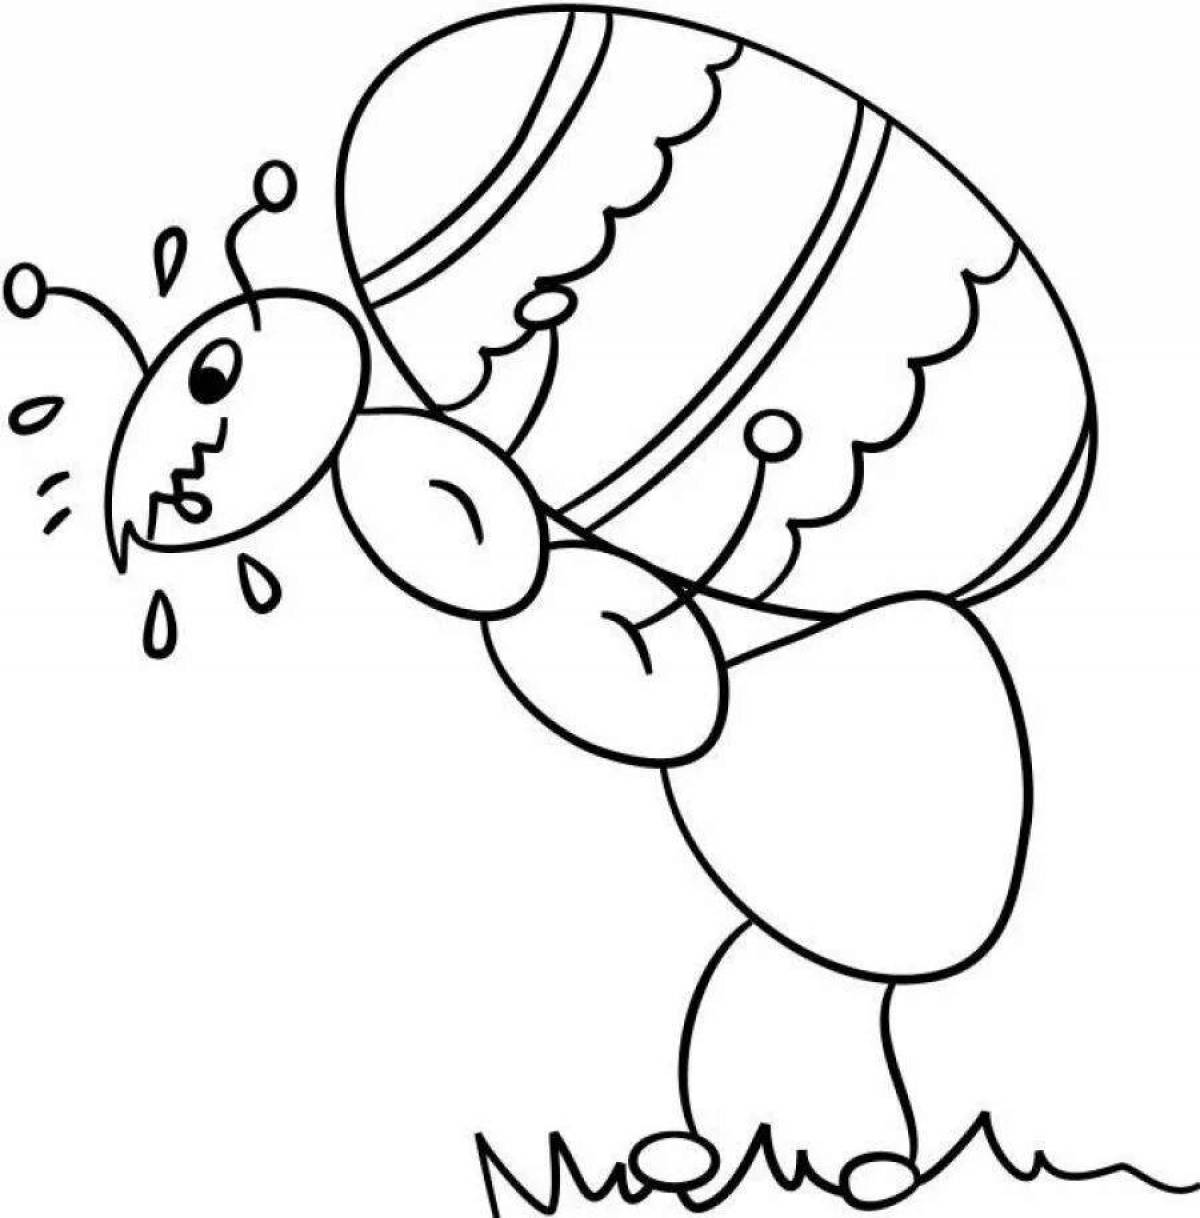 A fun ant coloring book for kids